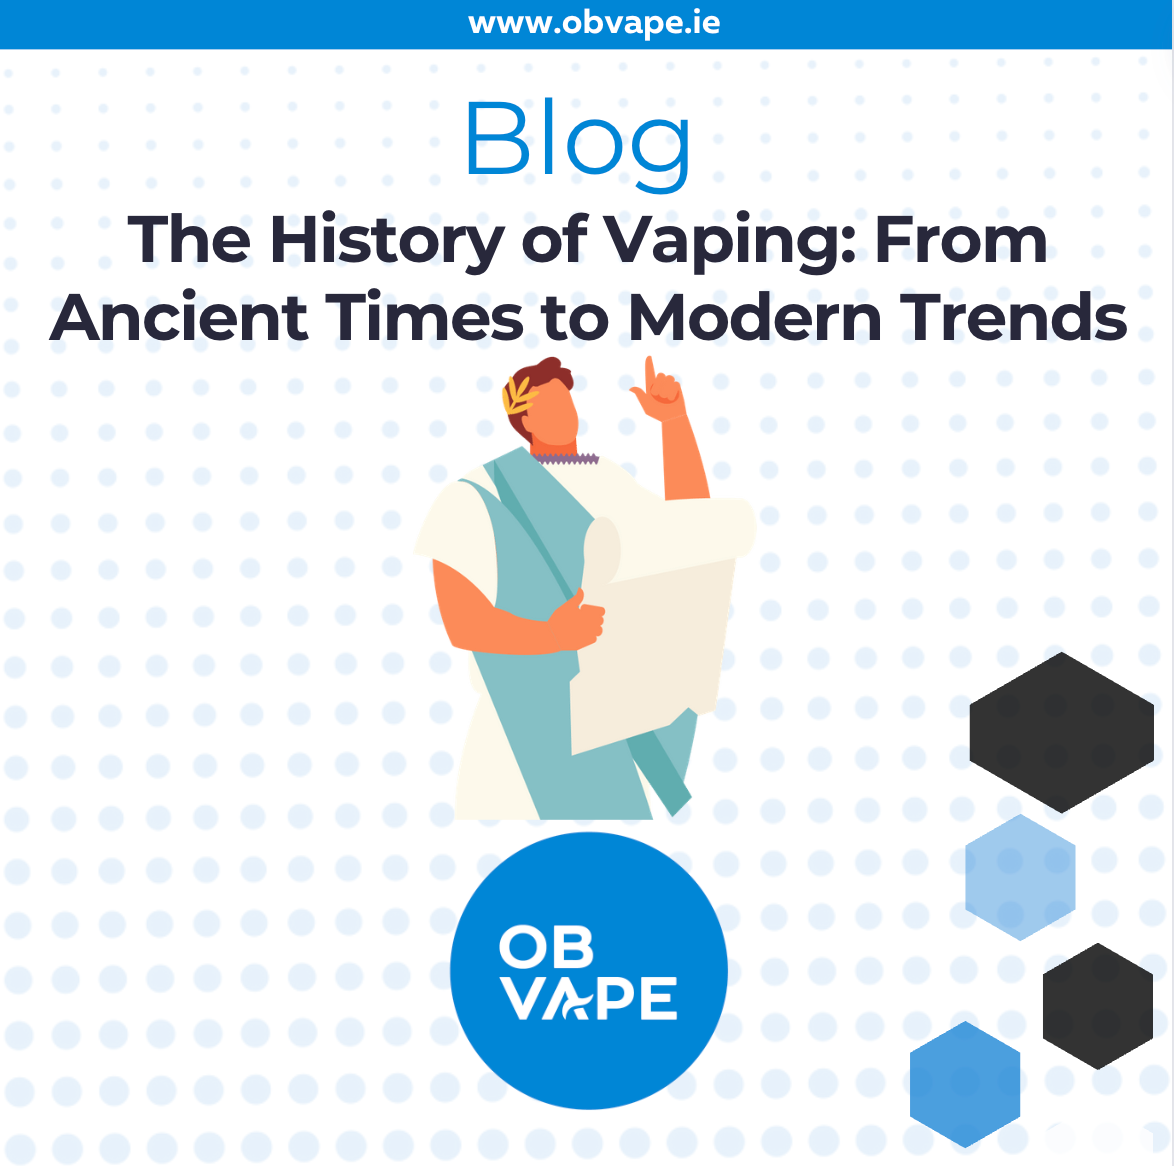 The History of Vaping: From Ancient Times to Modern Trends